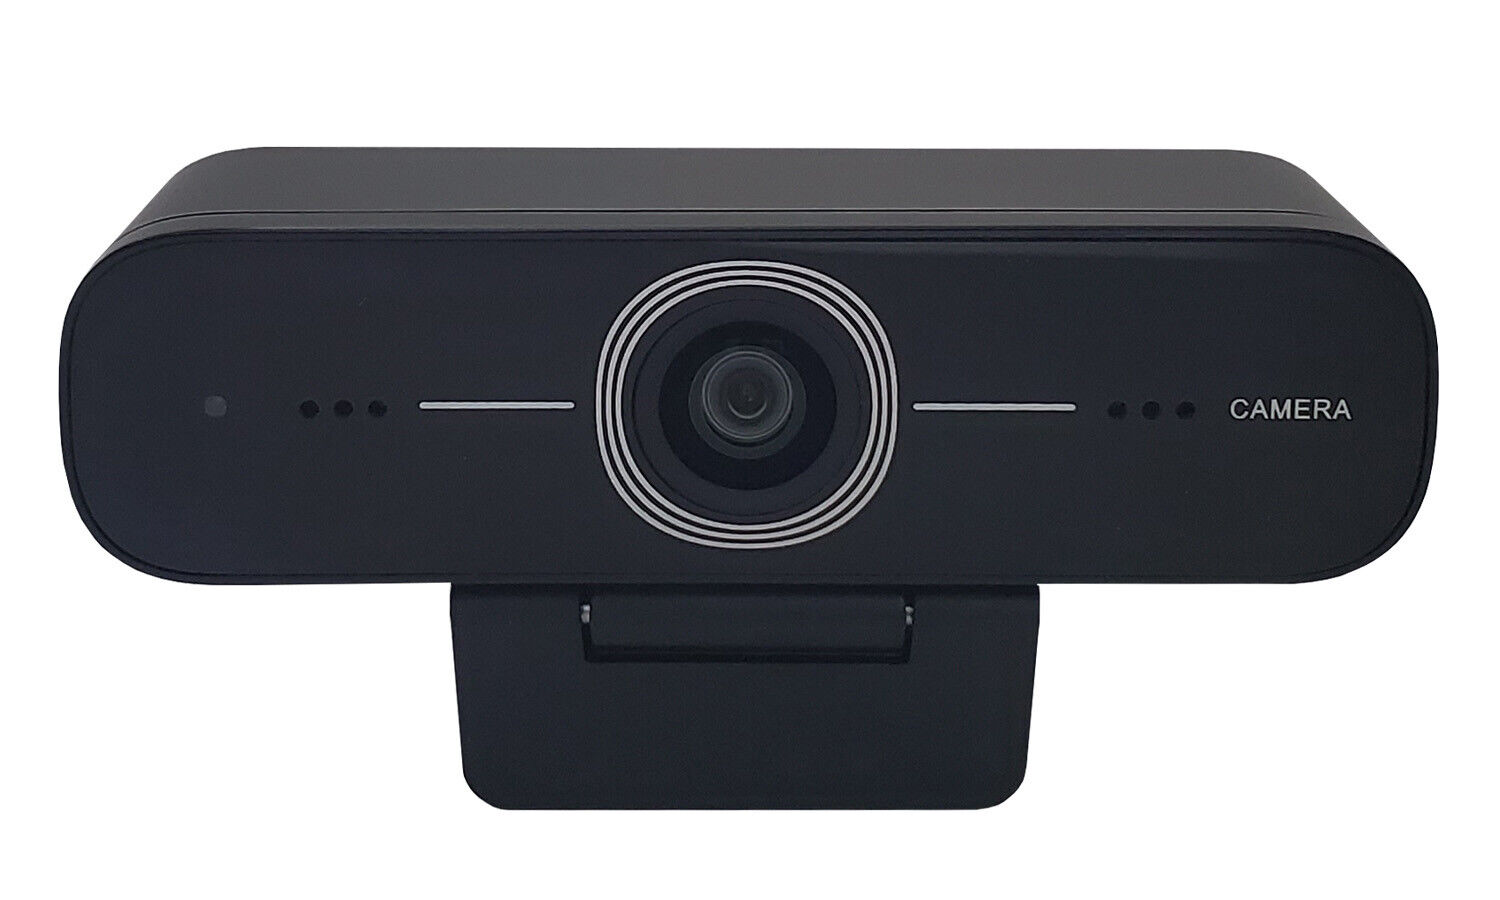 BZBGEAR 1080P USB Conference Camera with Microphone